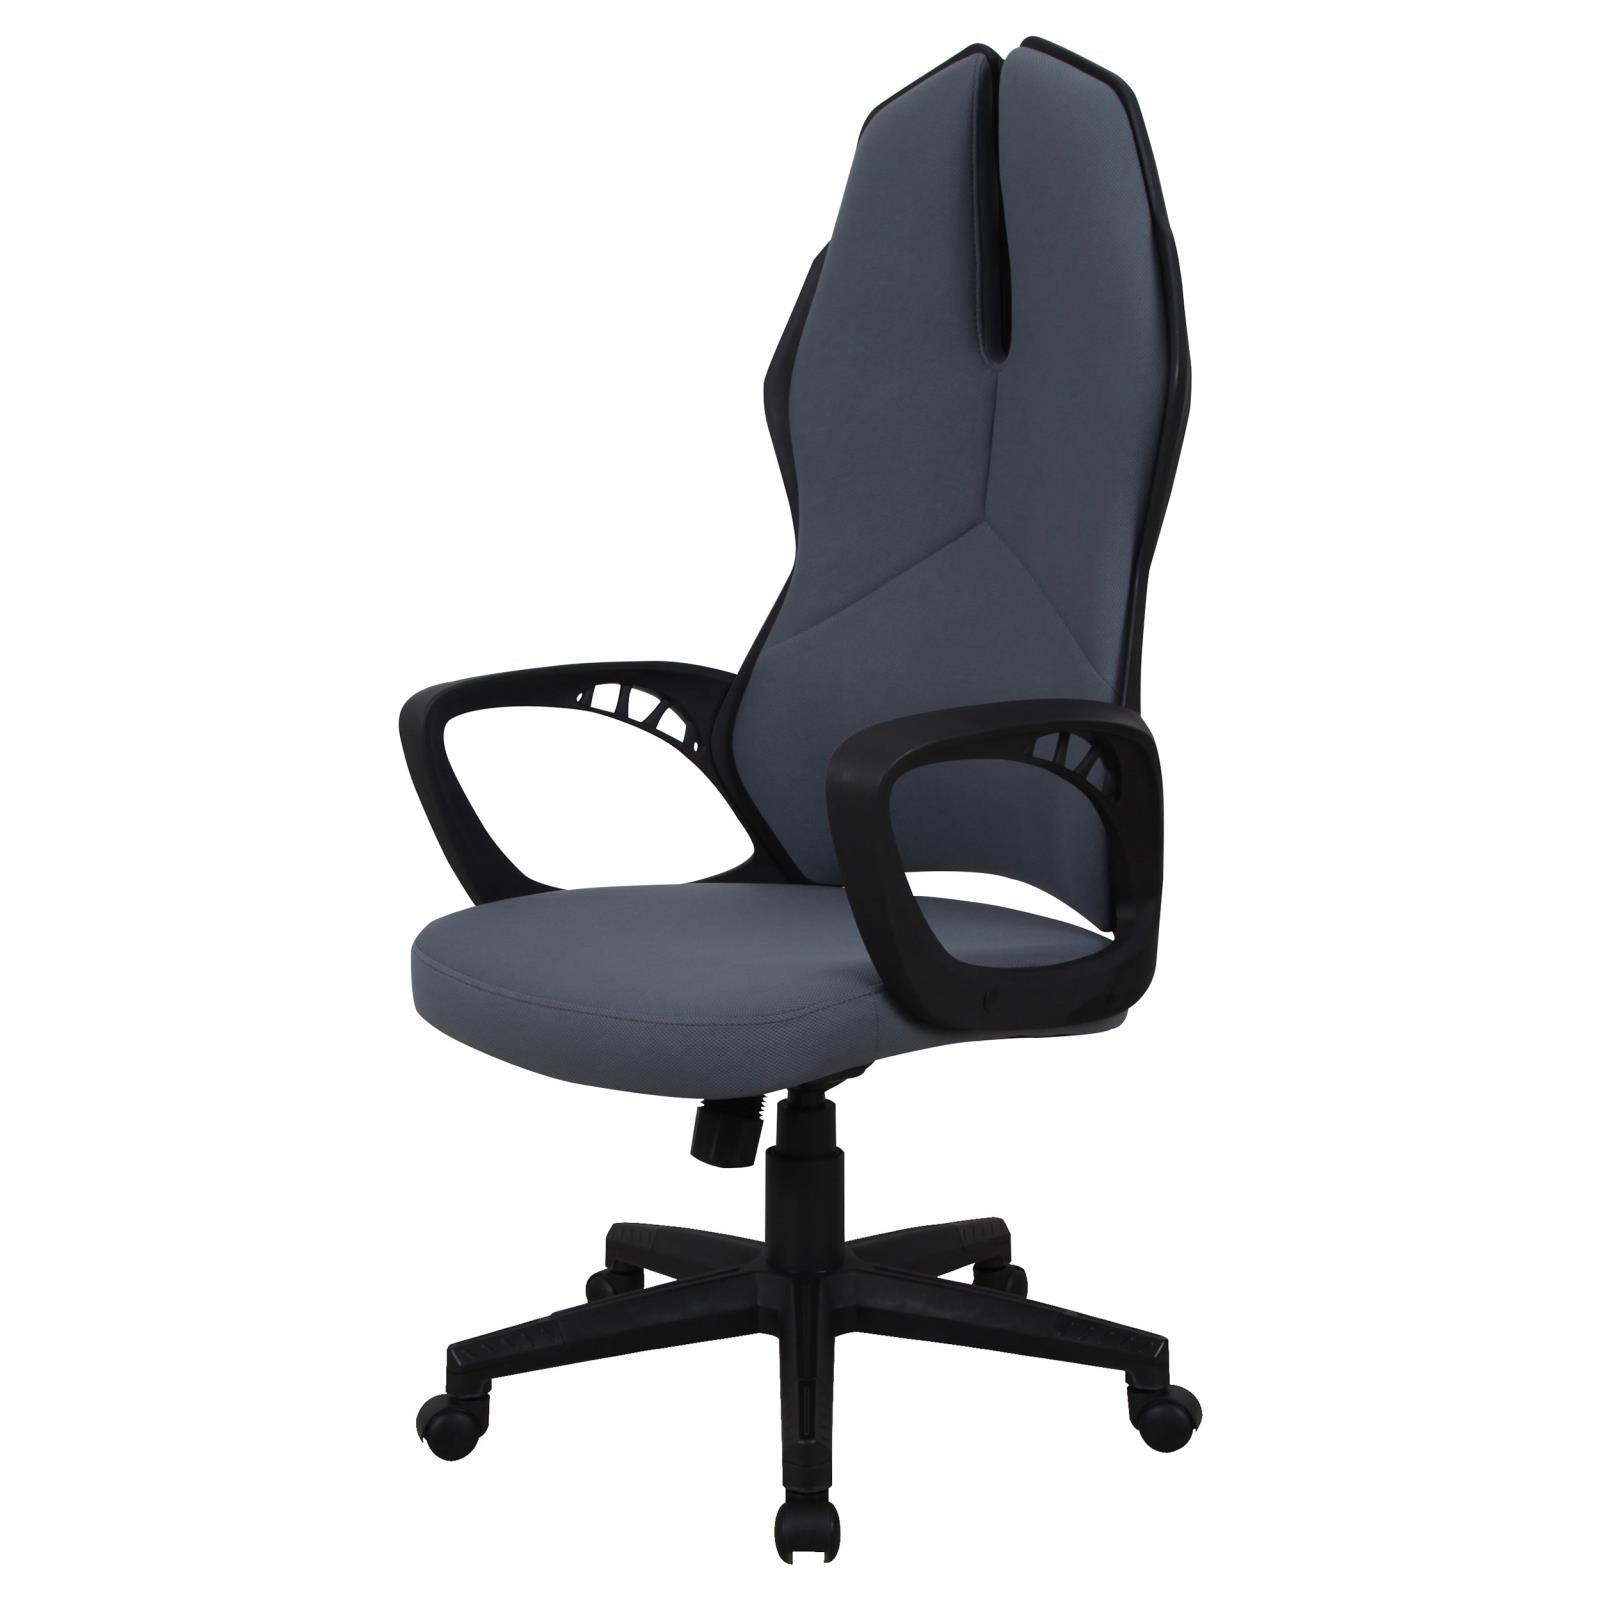 Grey Upholstered Office Chair 881366 - Ella Furniture